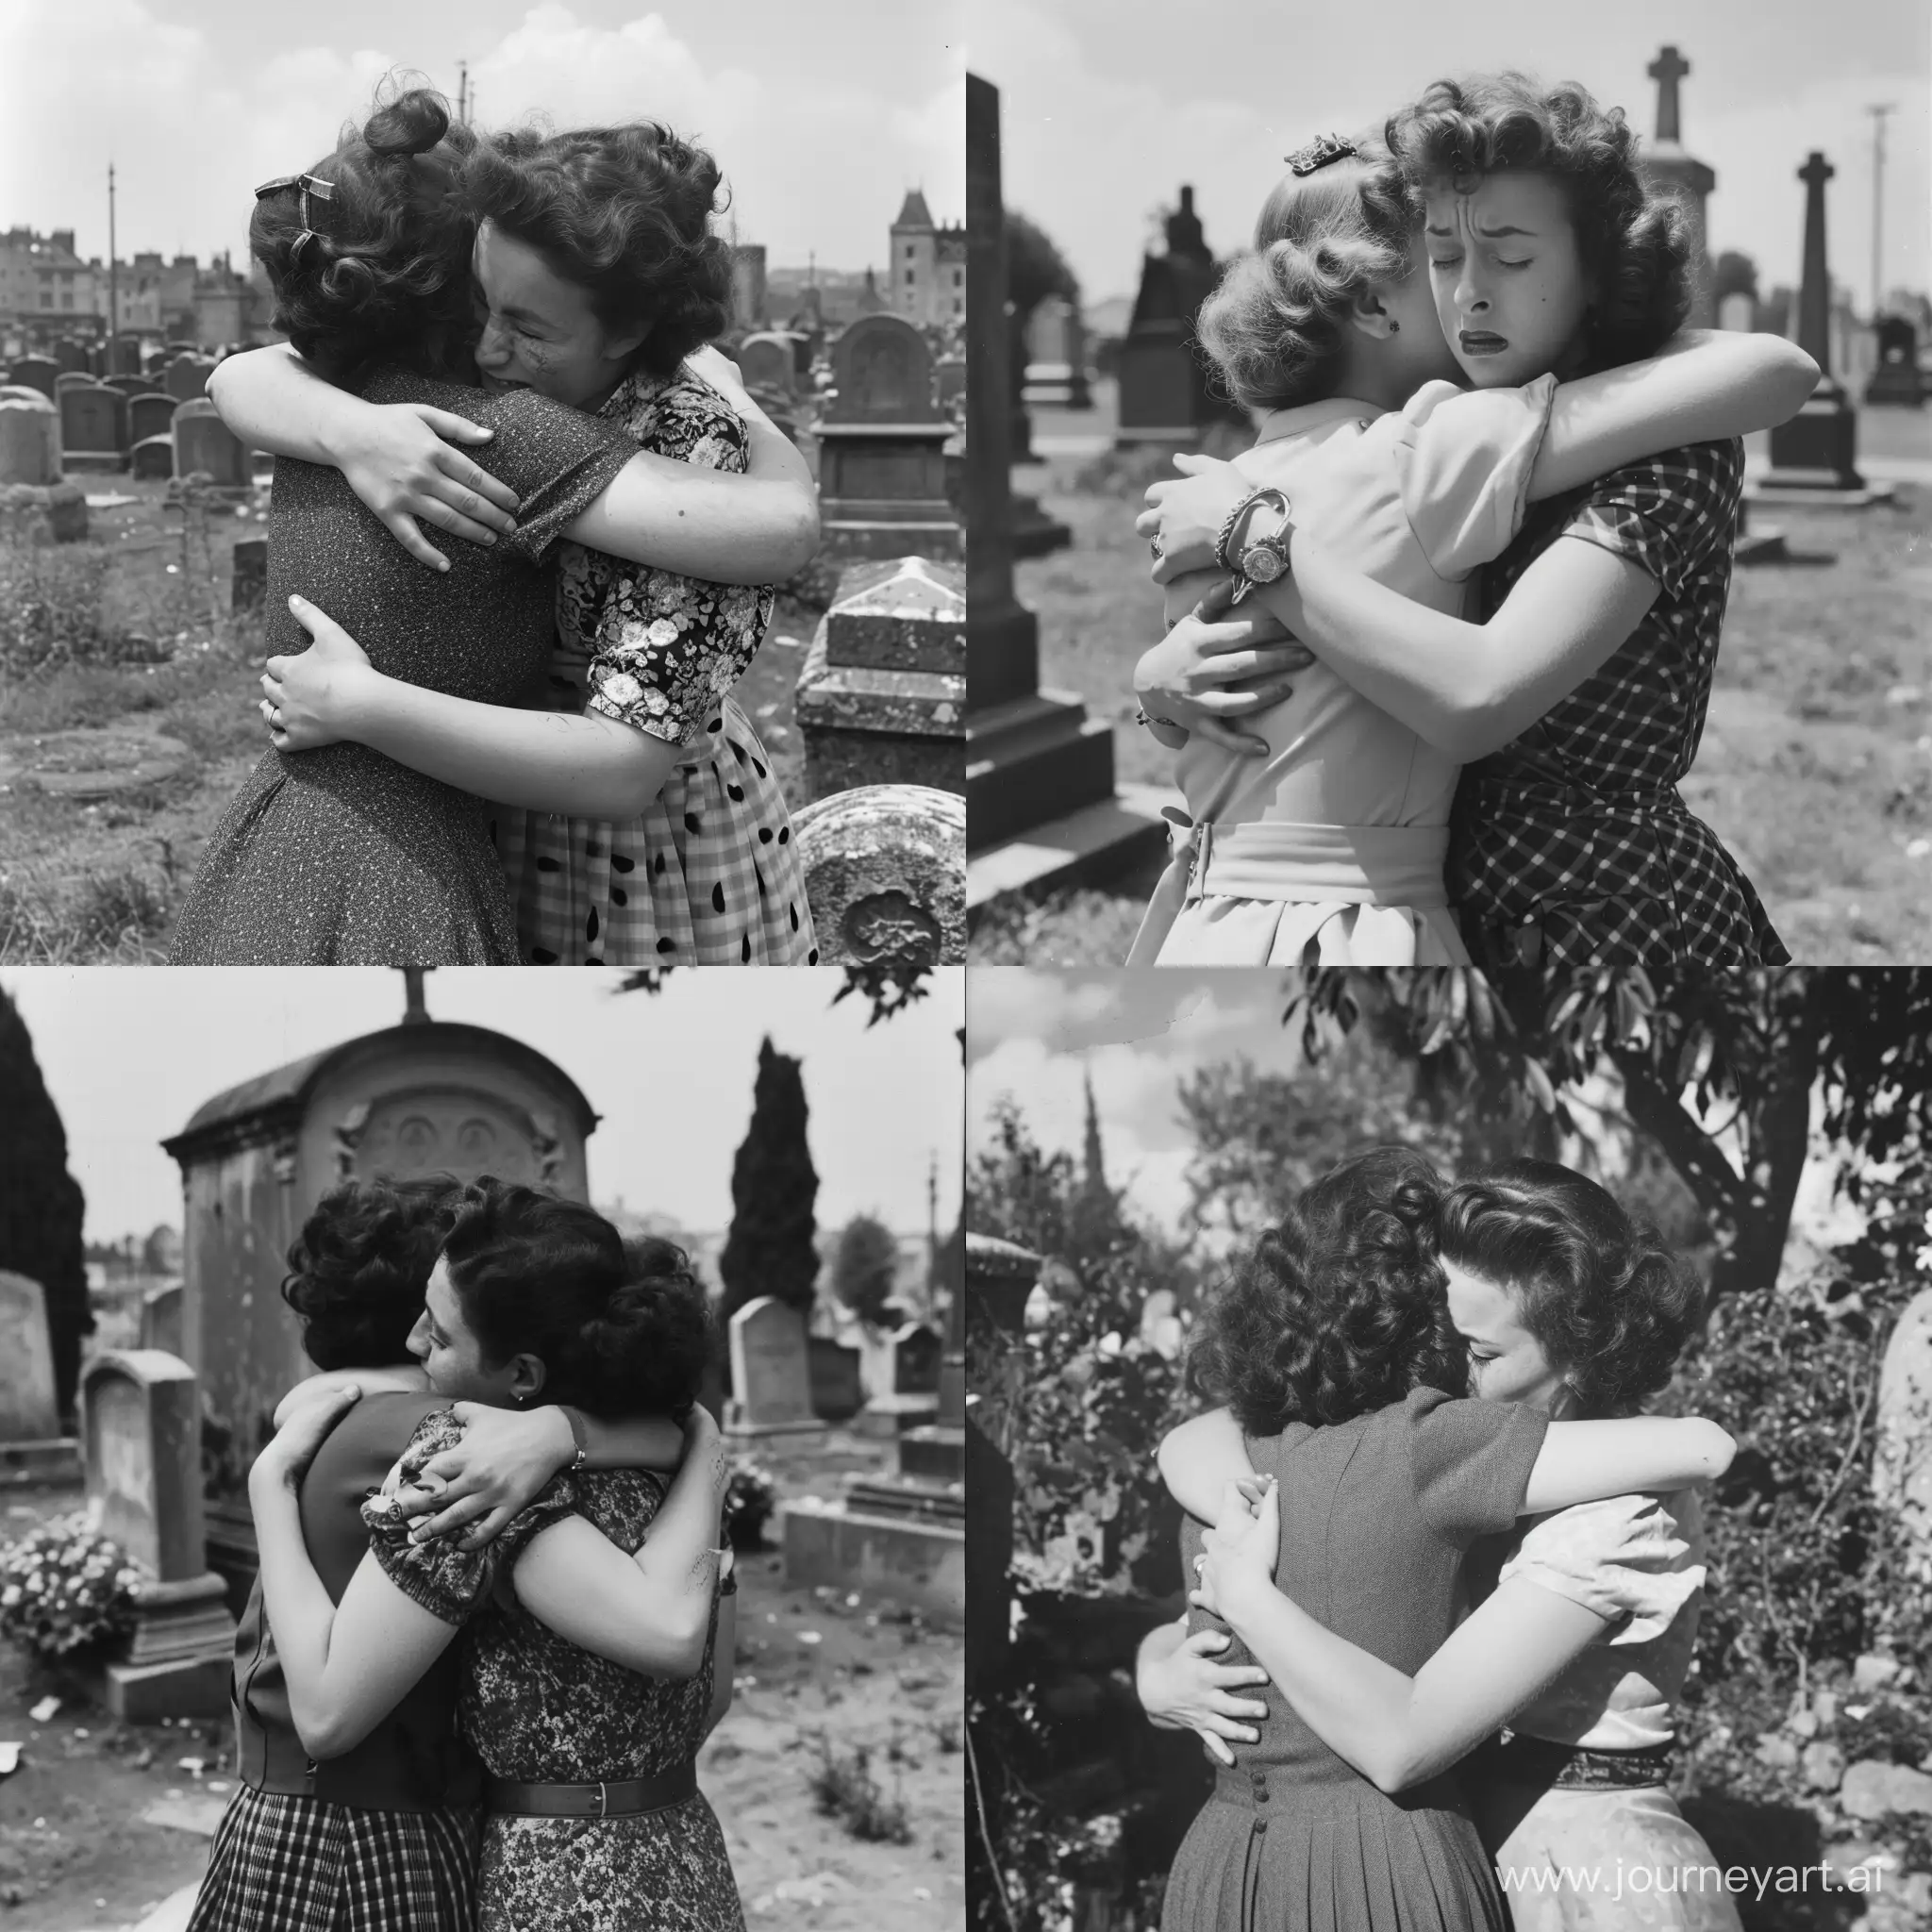 Lesbian european french and short sleeves puffy compression 1950s Photo  hug  kisse arm crying wail cemetery